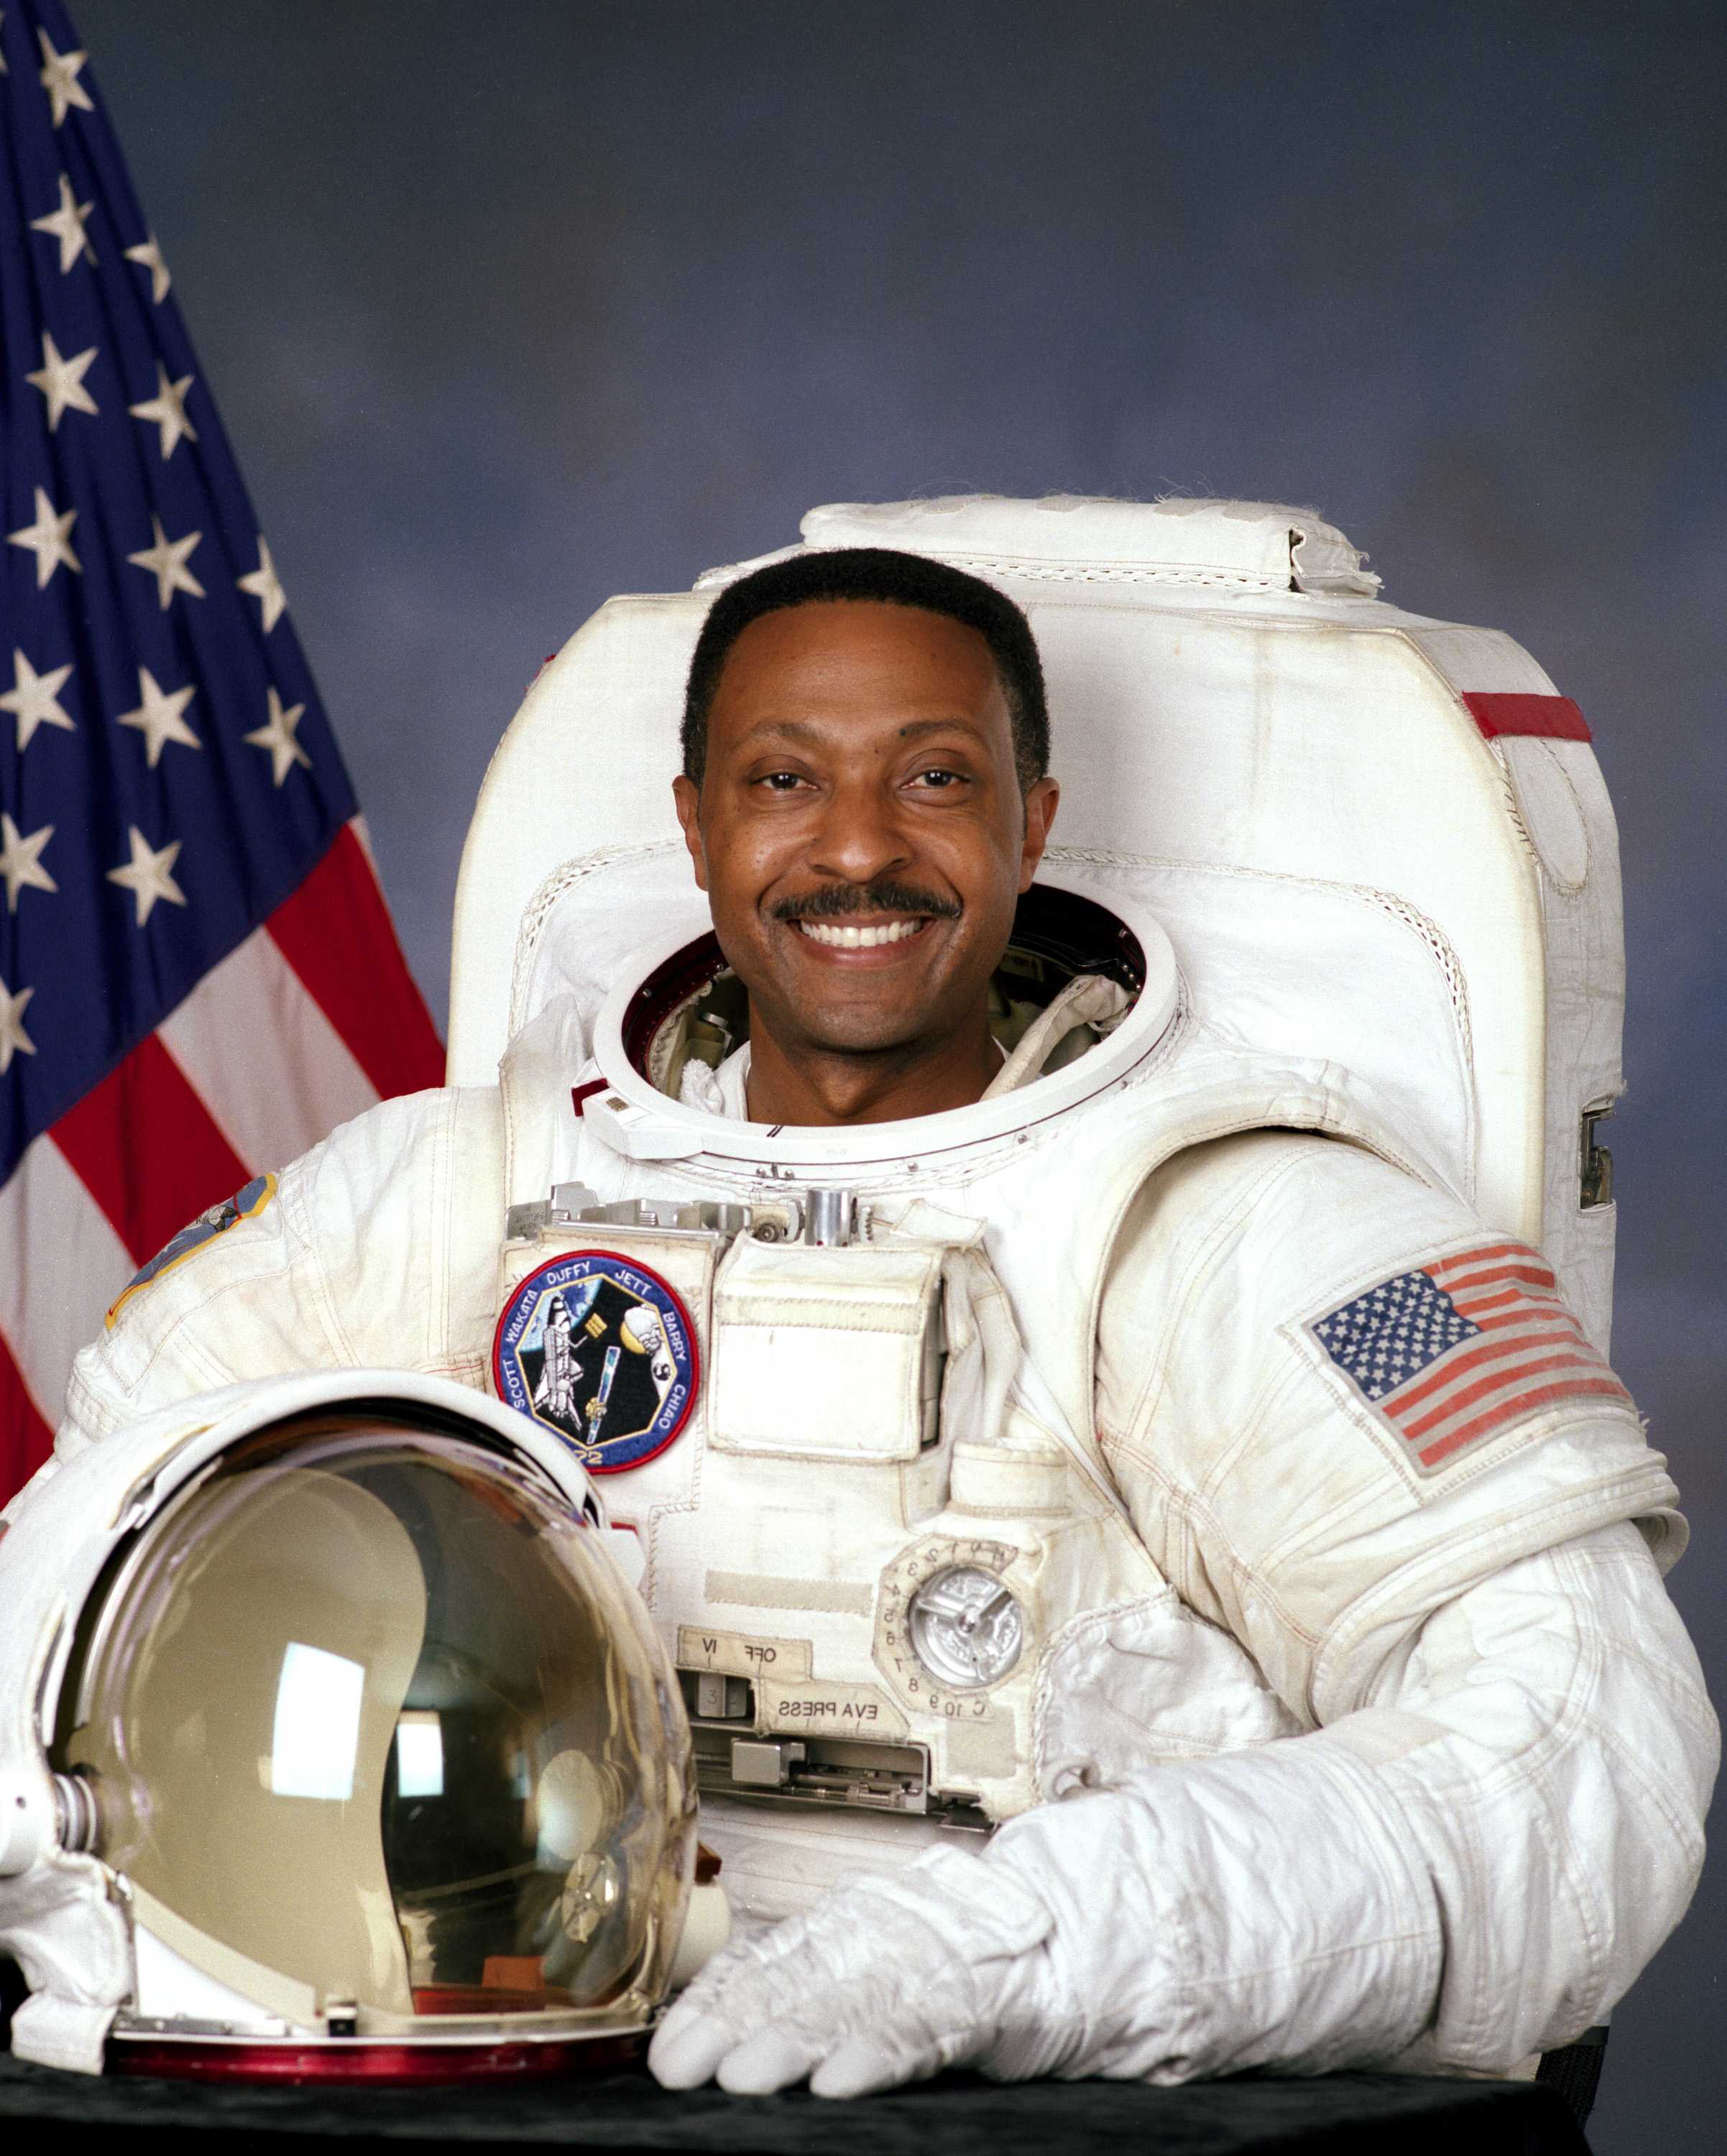 Winston Scott is wearing a white spacesuit adorned with NASA patches and smiling towards the camera.